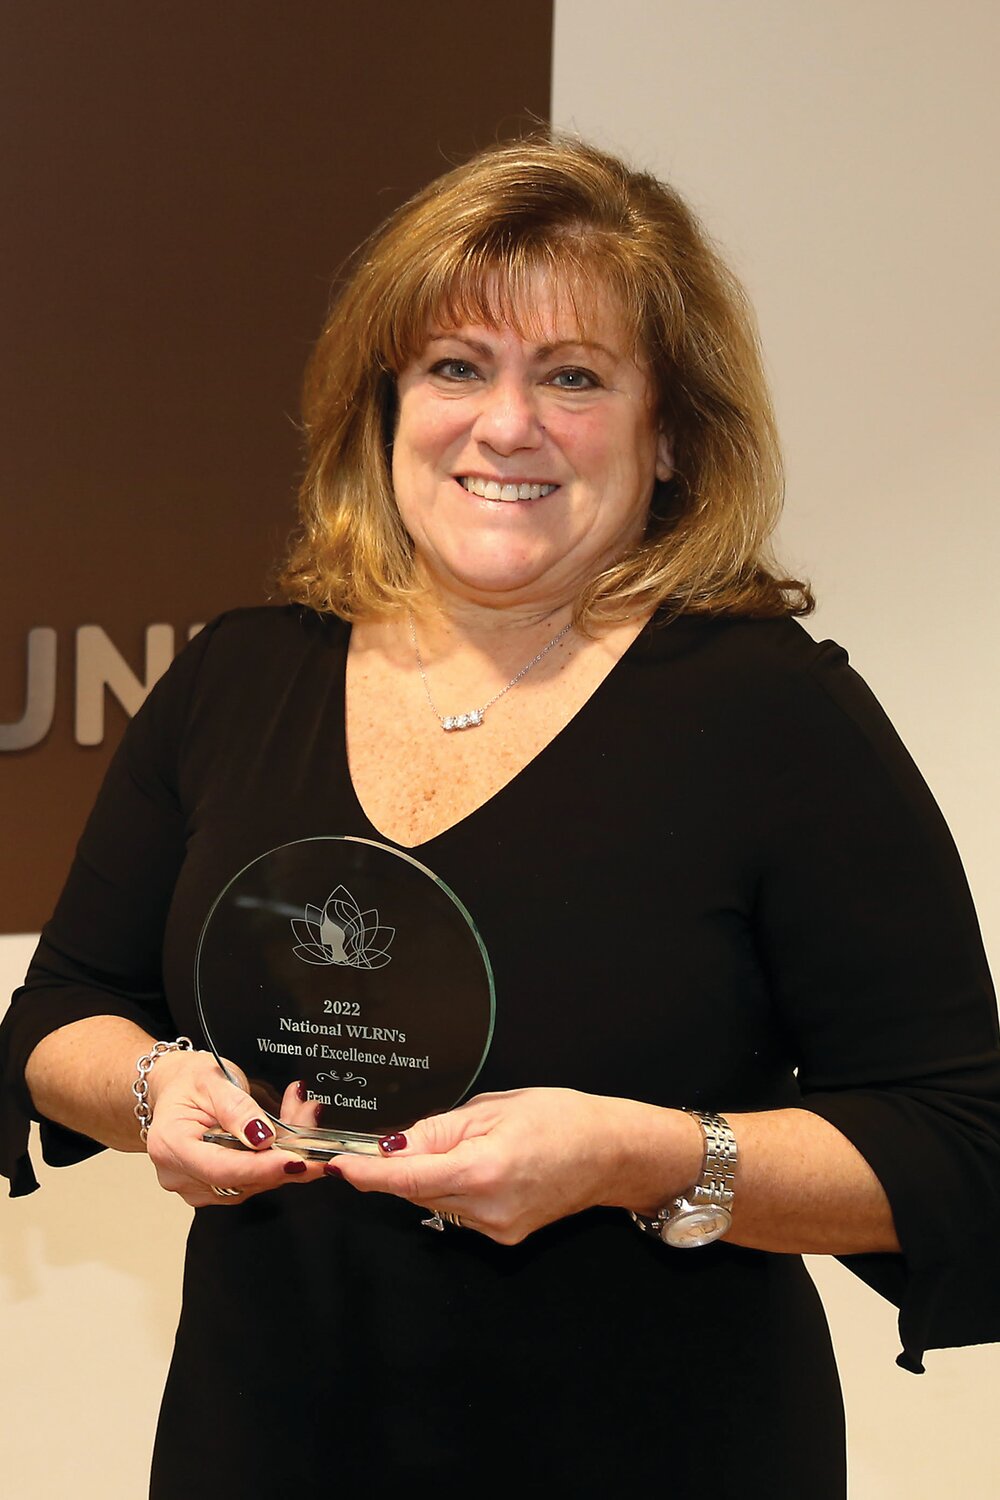 Fran Cardaci holds her 2022 YUSA National Women of Excellence Award.